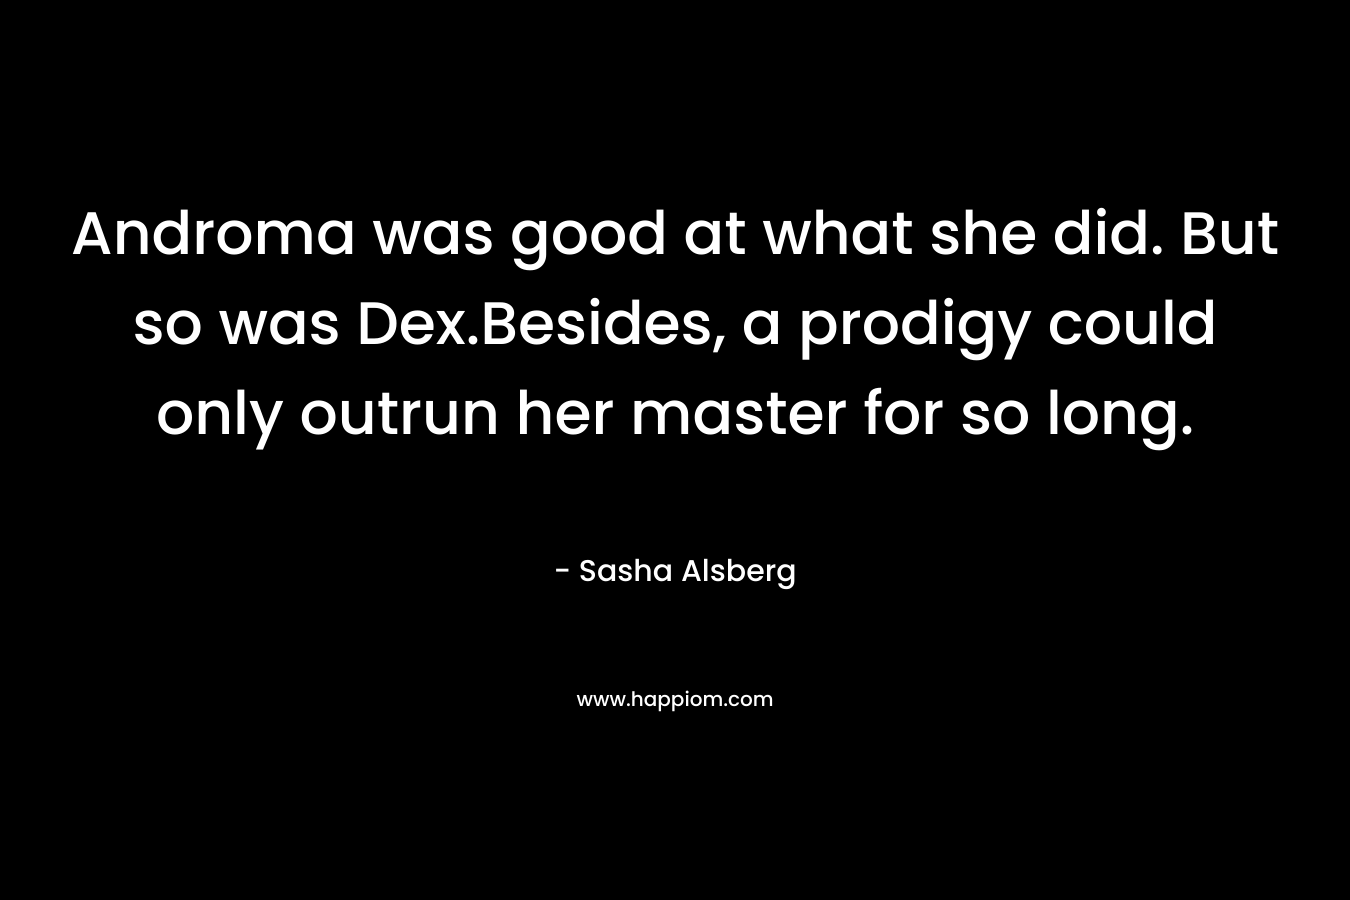 Androma was good at what she did. But so was Dex.Besides, a prodigy could only outrun her master for so long.